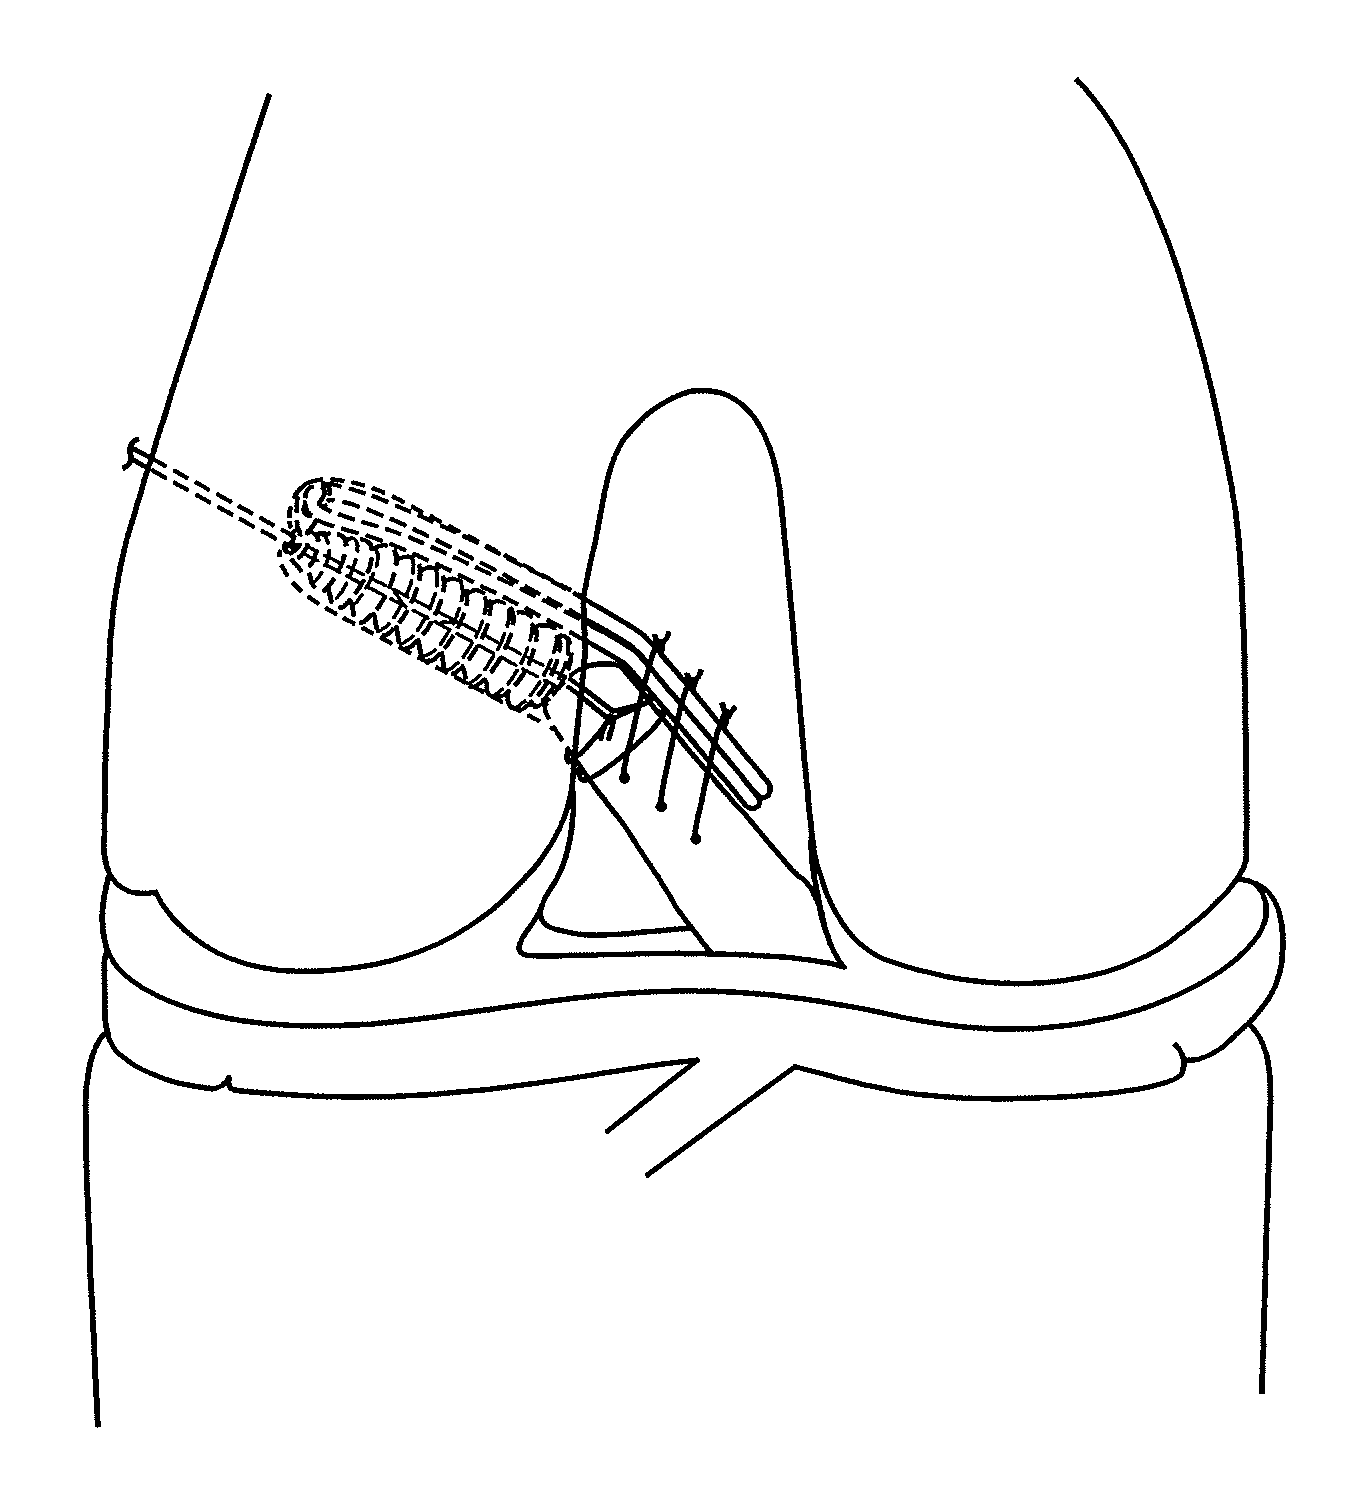 Implant and method for repair of the anterior cruciate ligament